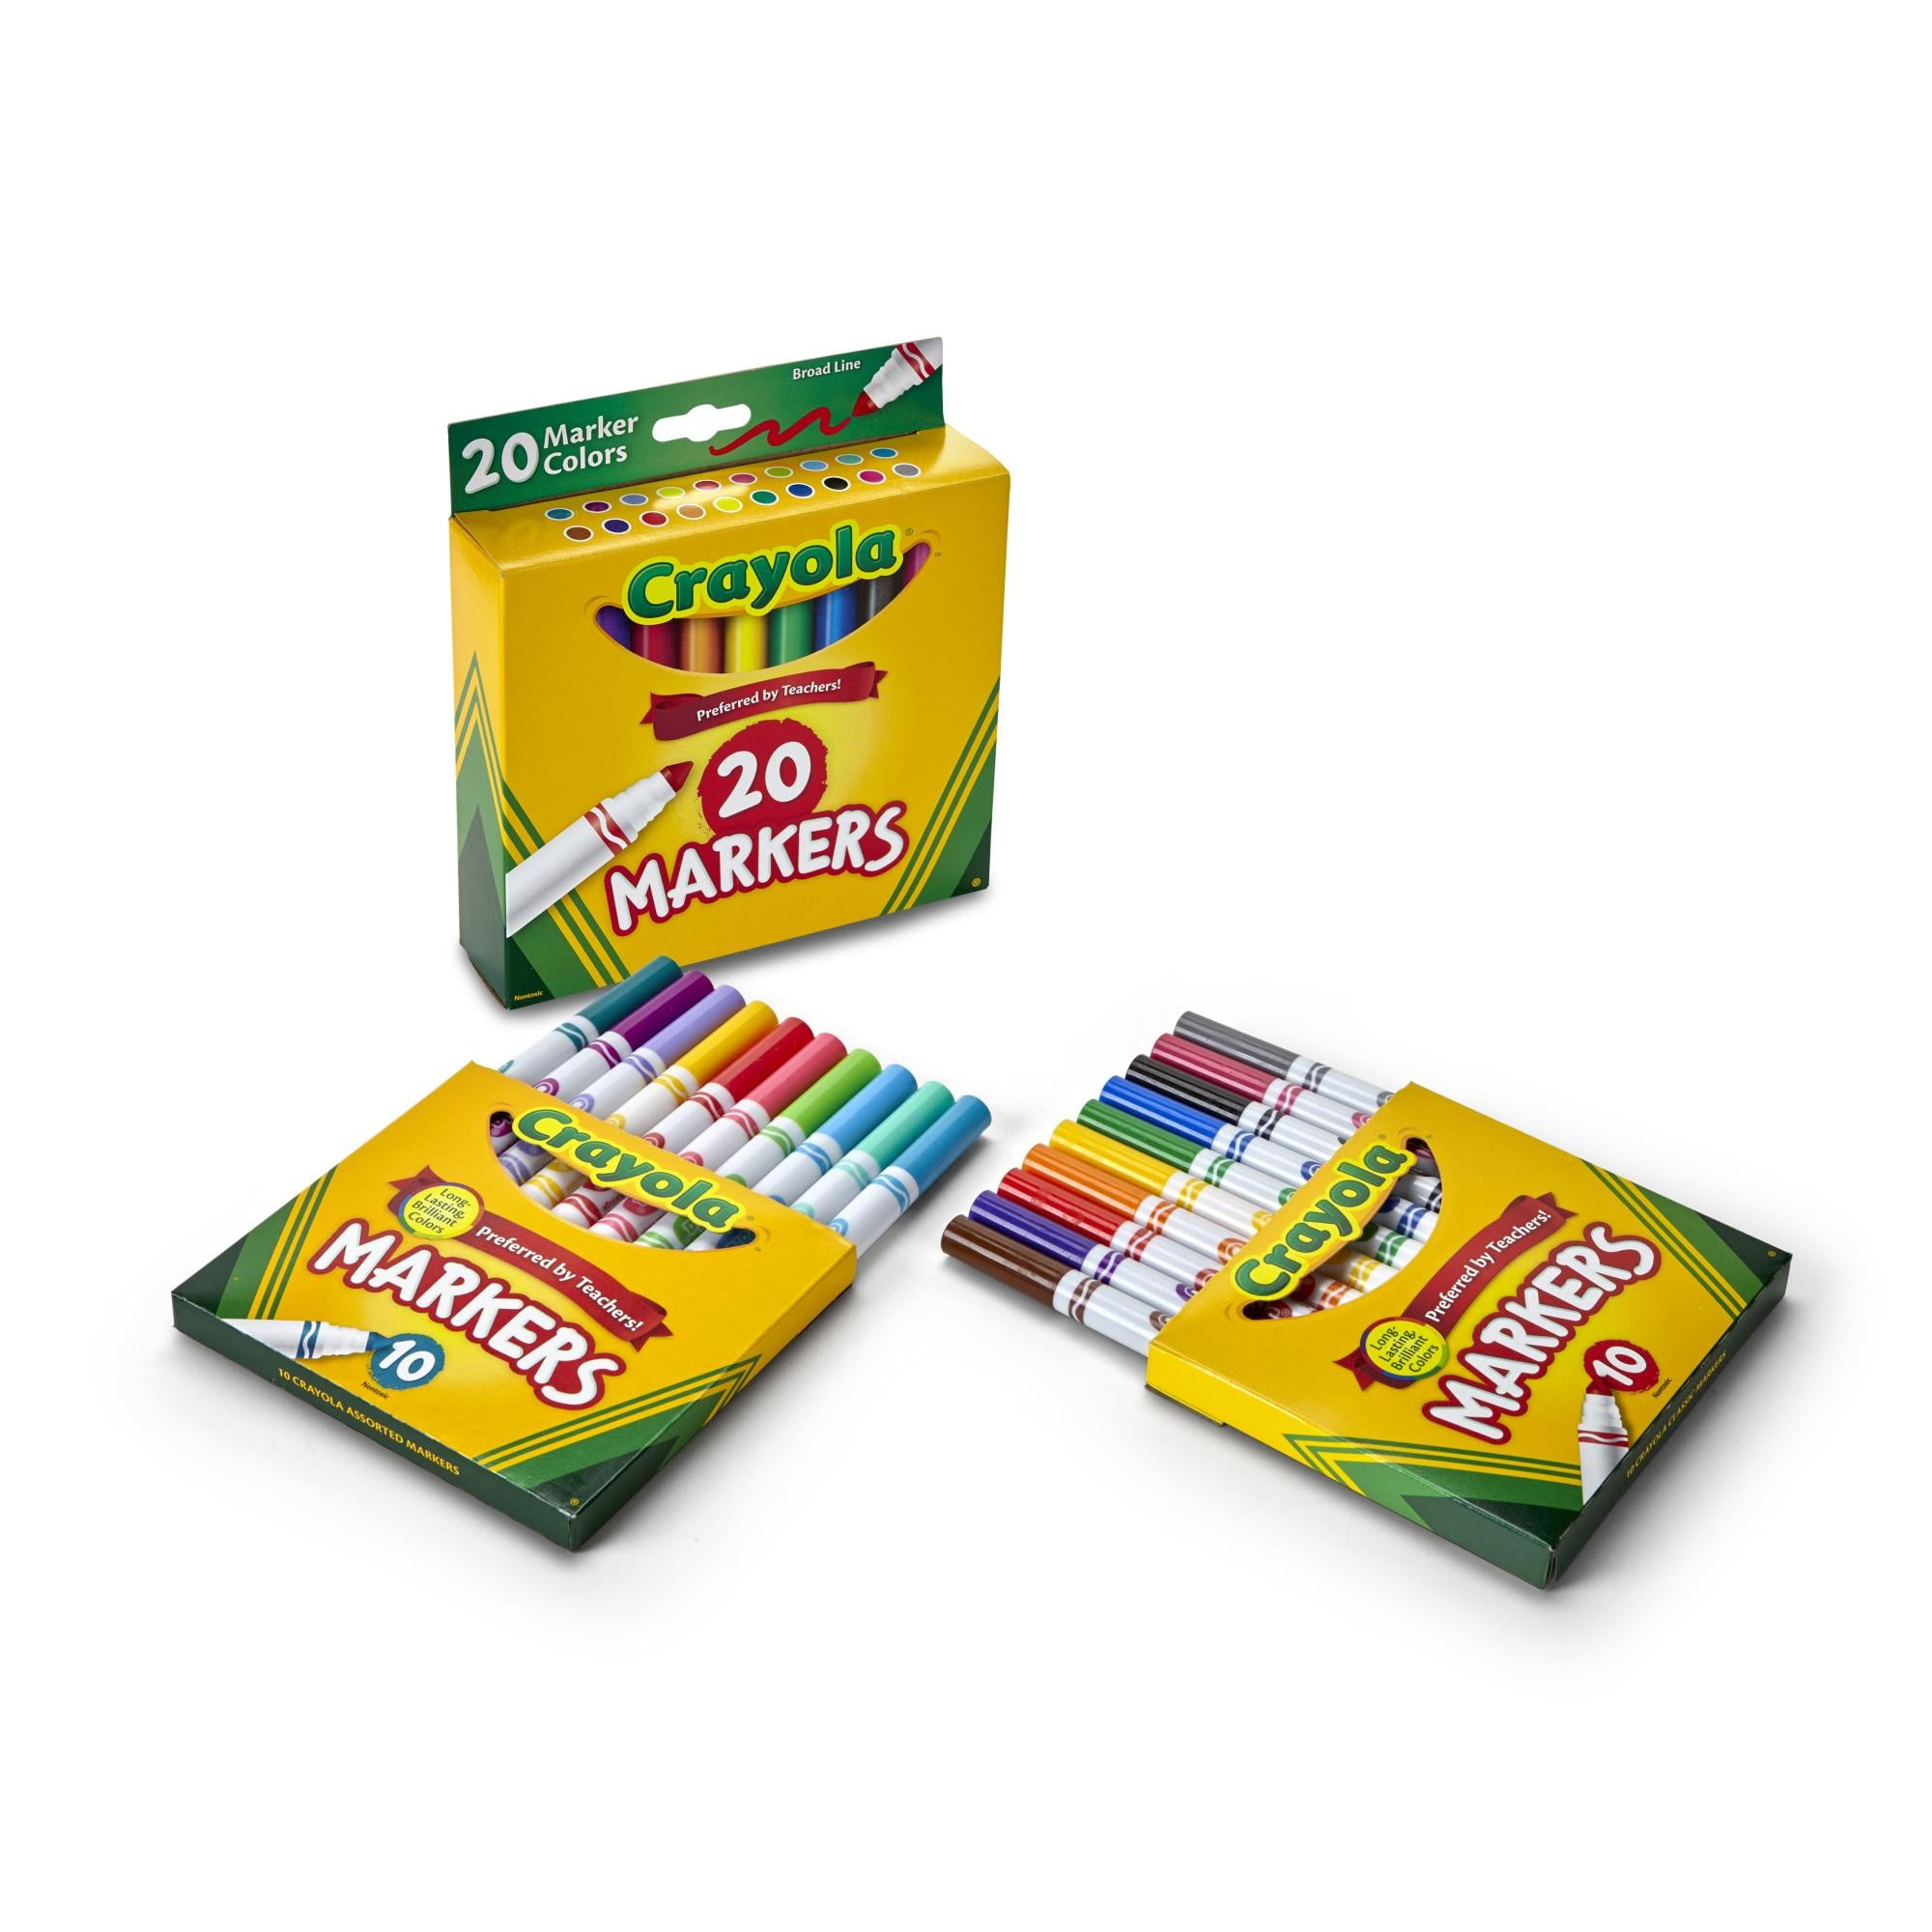 CRAYOLA MIGHTY MARKS MARKERS CLASSIC 6 PACKS OF 4 COLOURED MARKERS 20 X MARKERS 